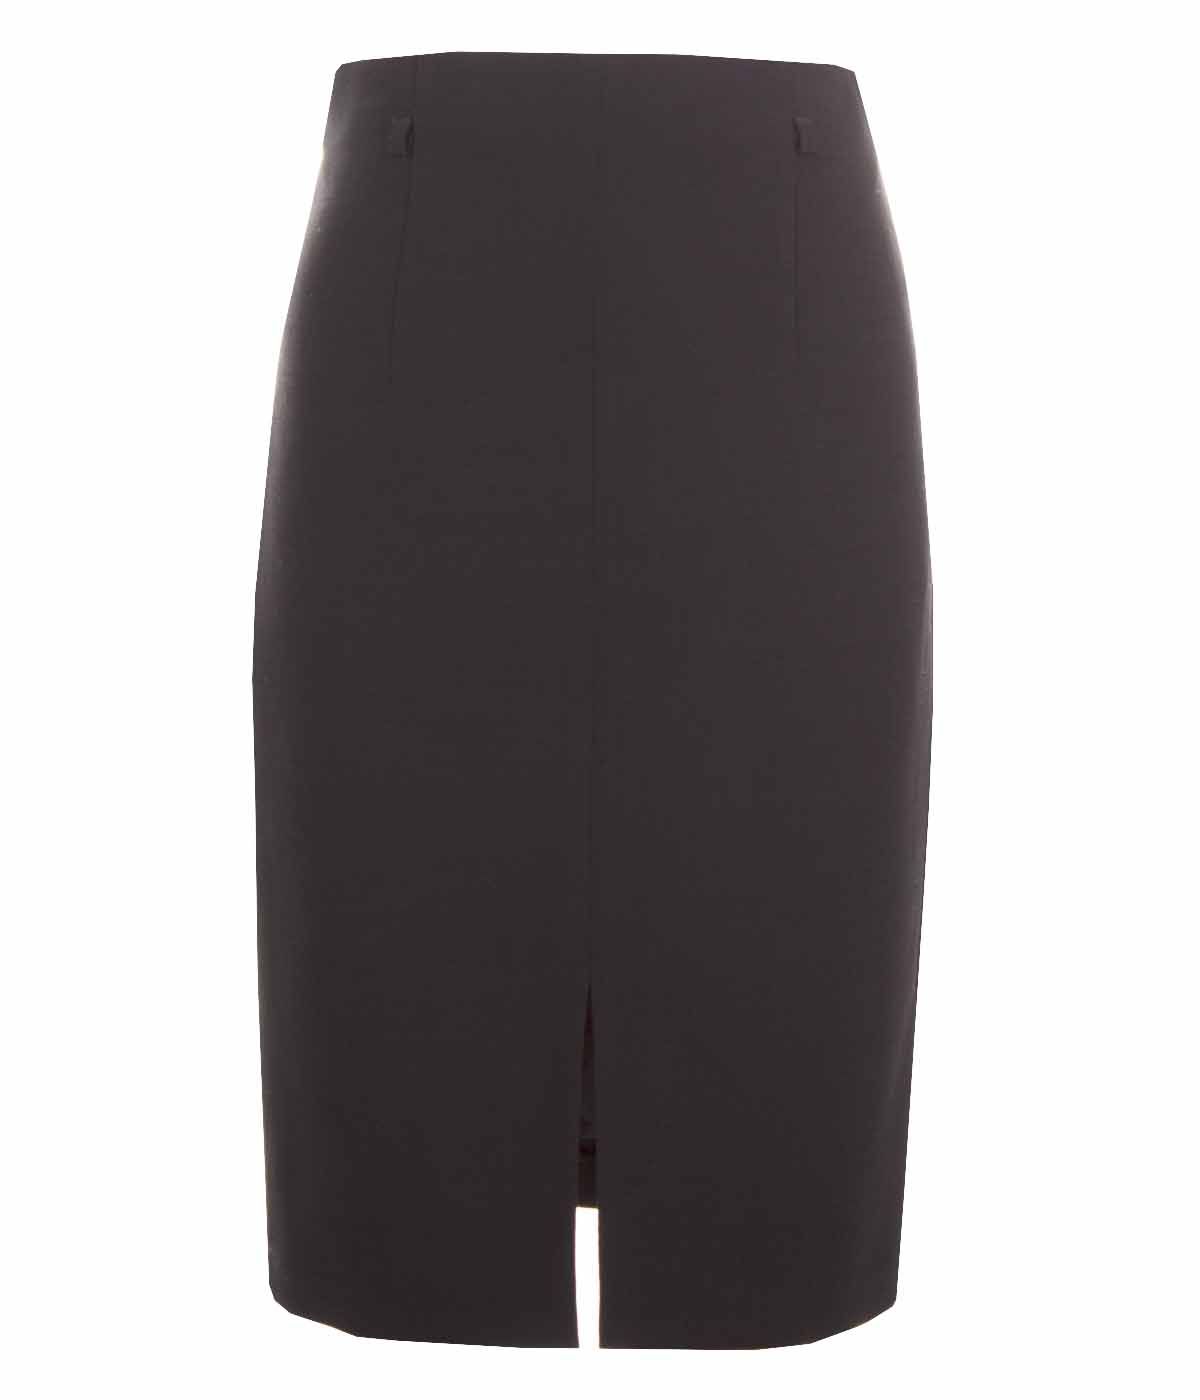 Pencil skirt with front slit, with rayon, wool and viscose 0